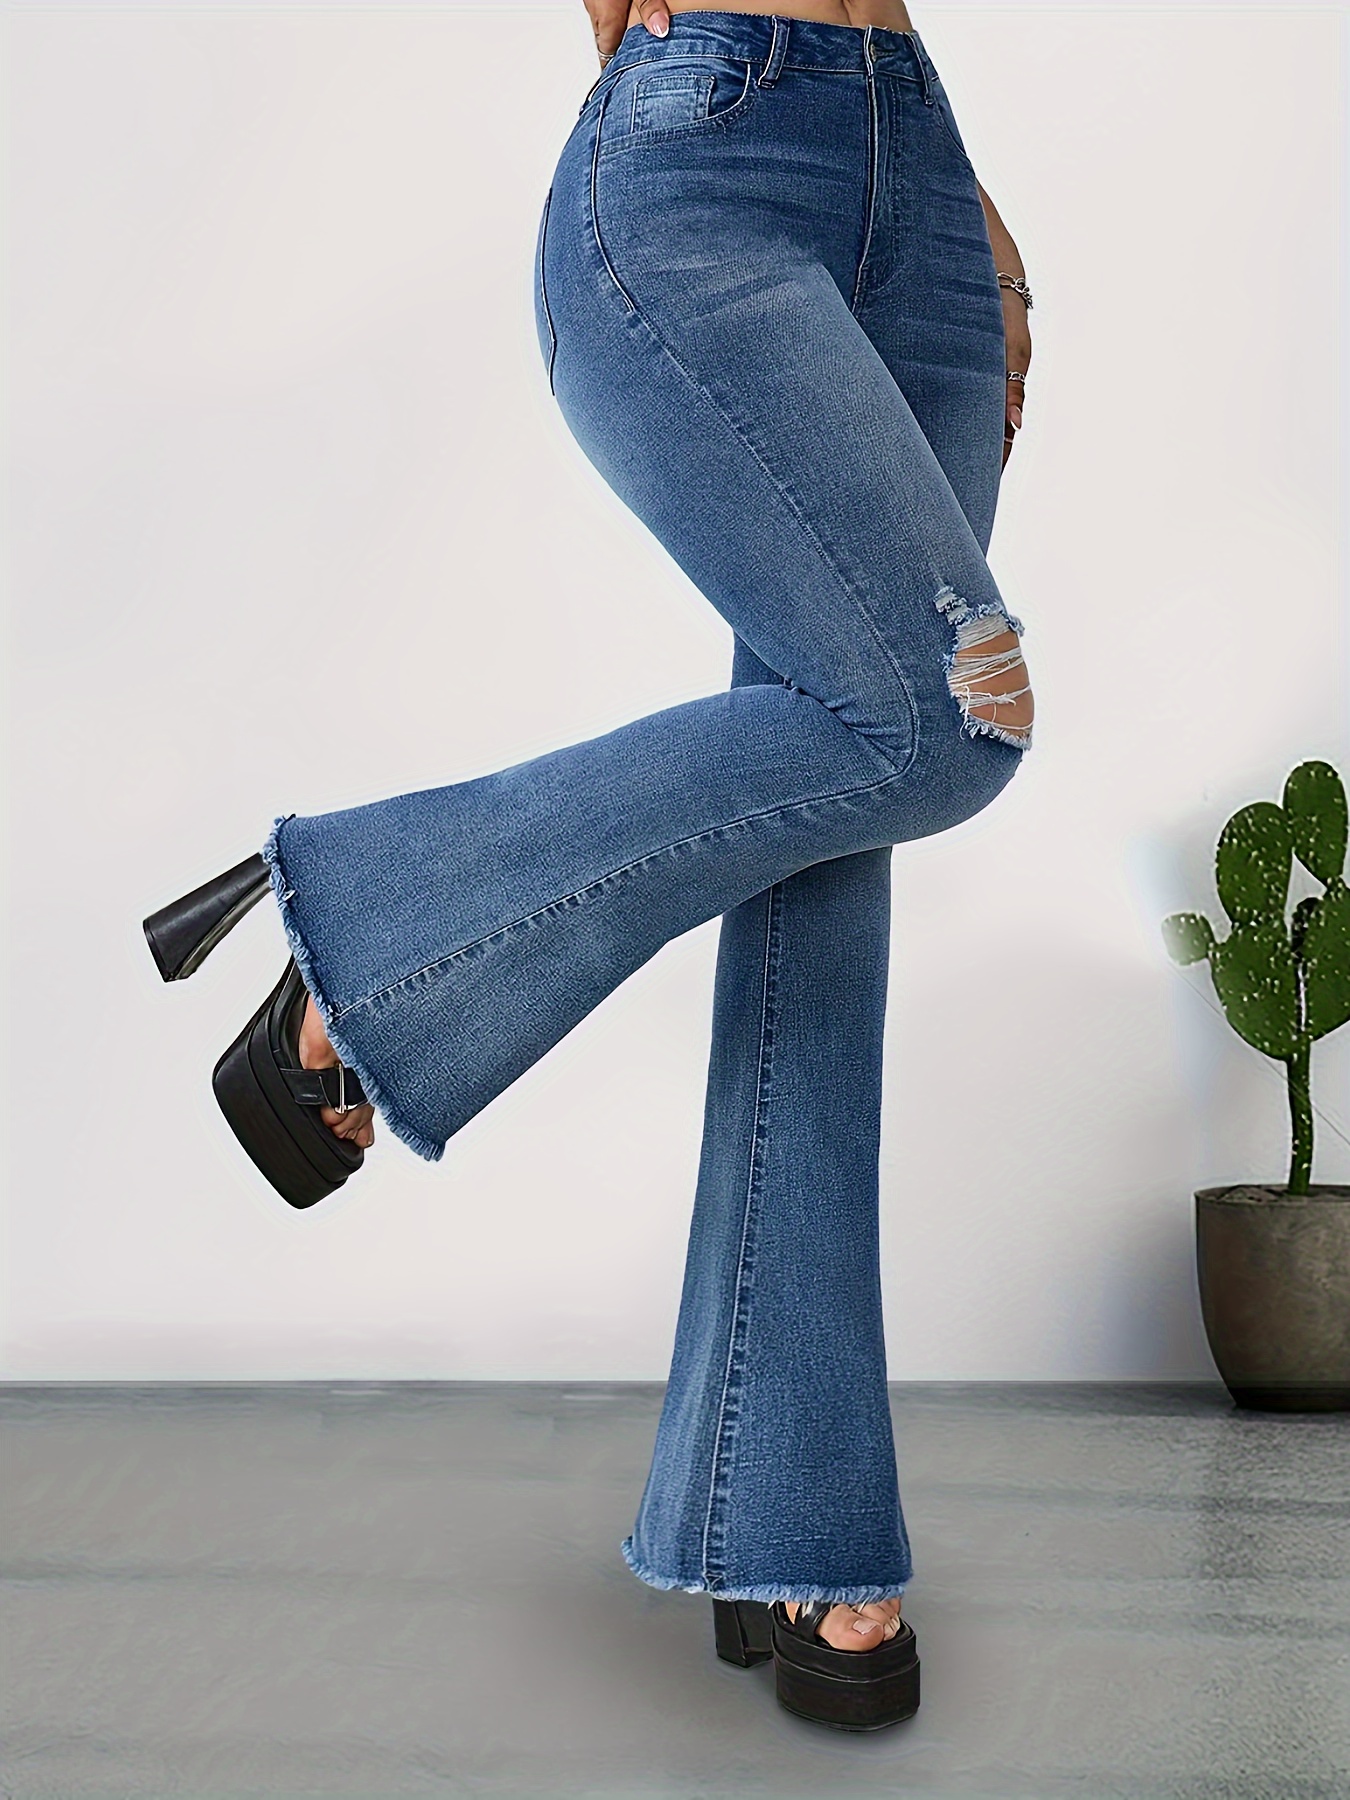 Ripped Holes Casual Flared Legs Jeans * Hem High Stretch Bell Bottom Jeans,  Women's Denim Jeans & Clothing